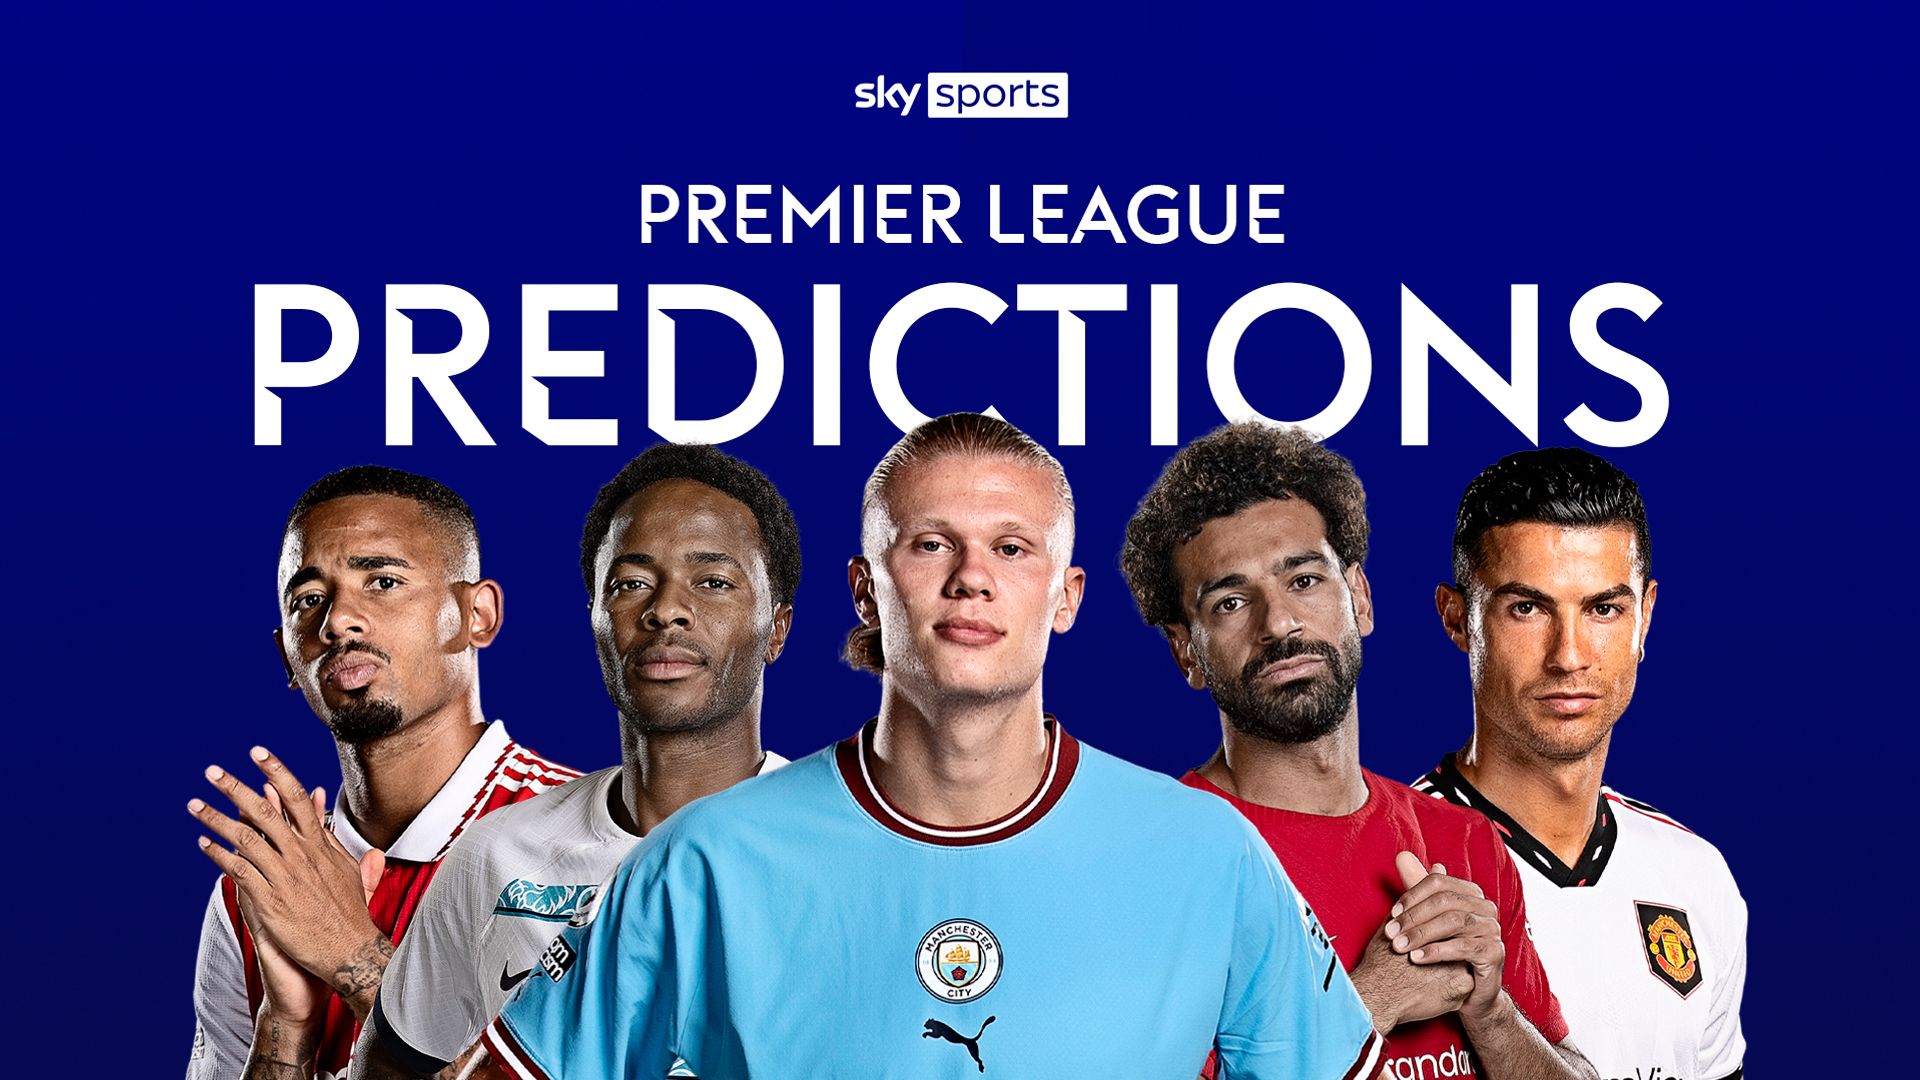 PL Predictions: Sunday wins for City and Leeds